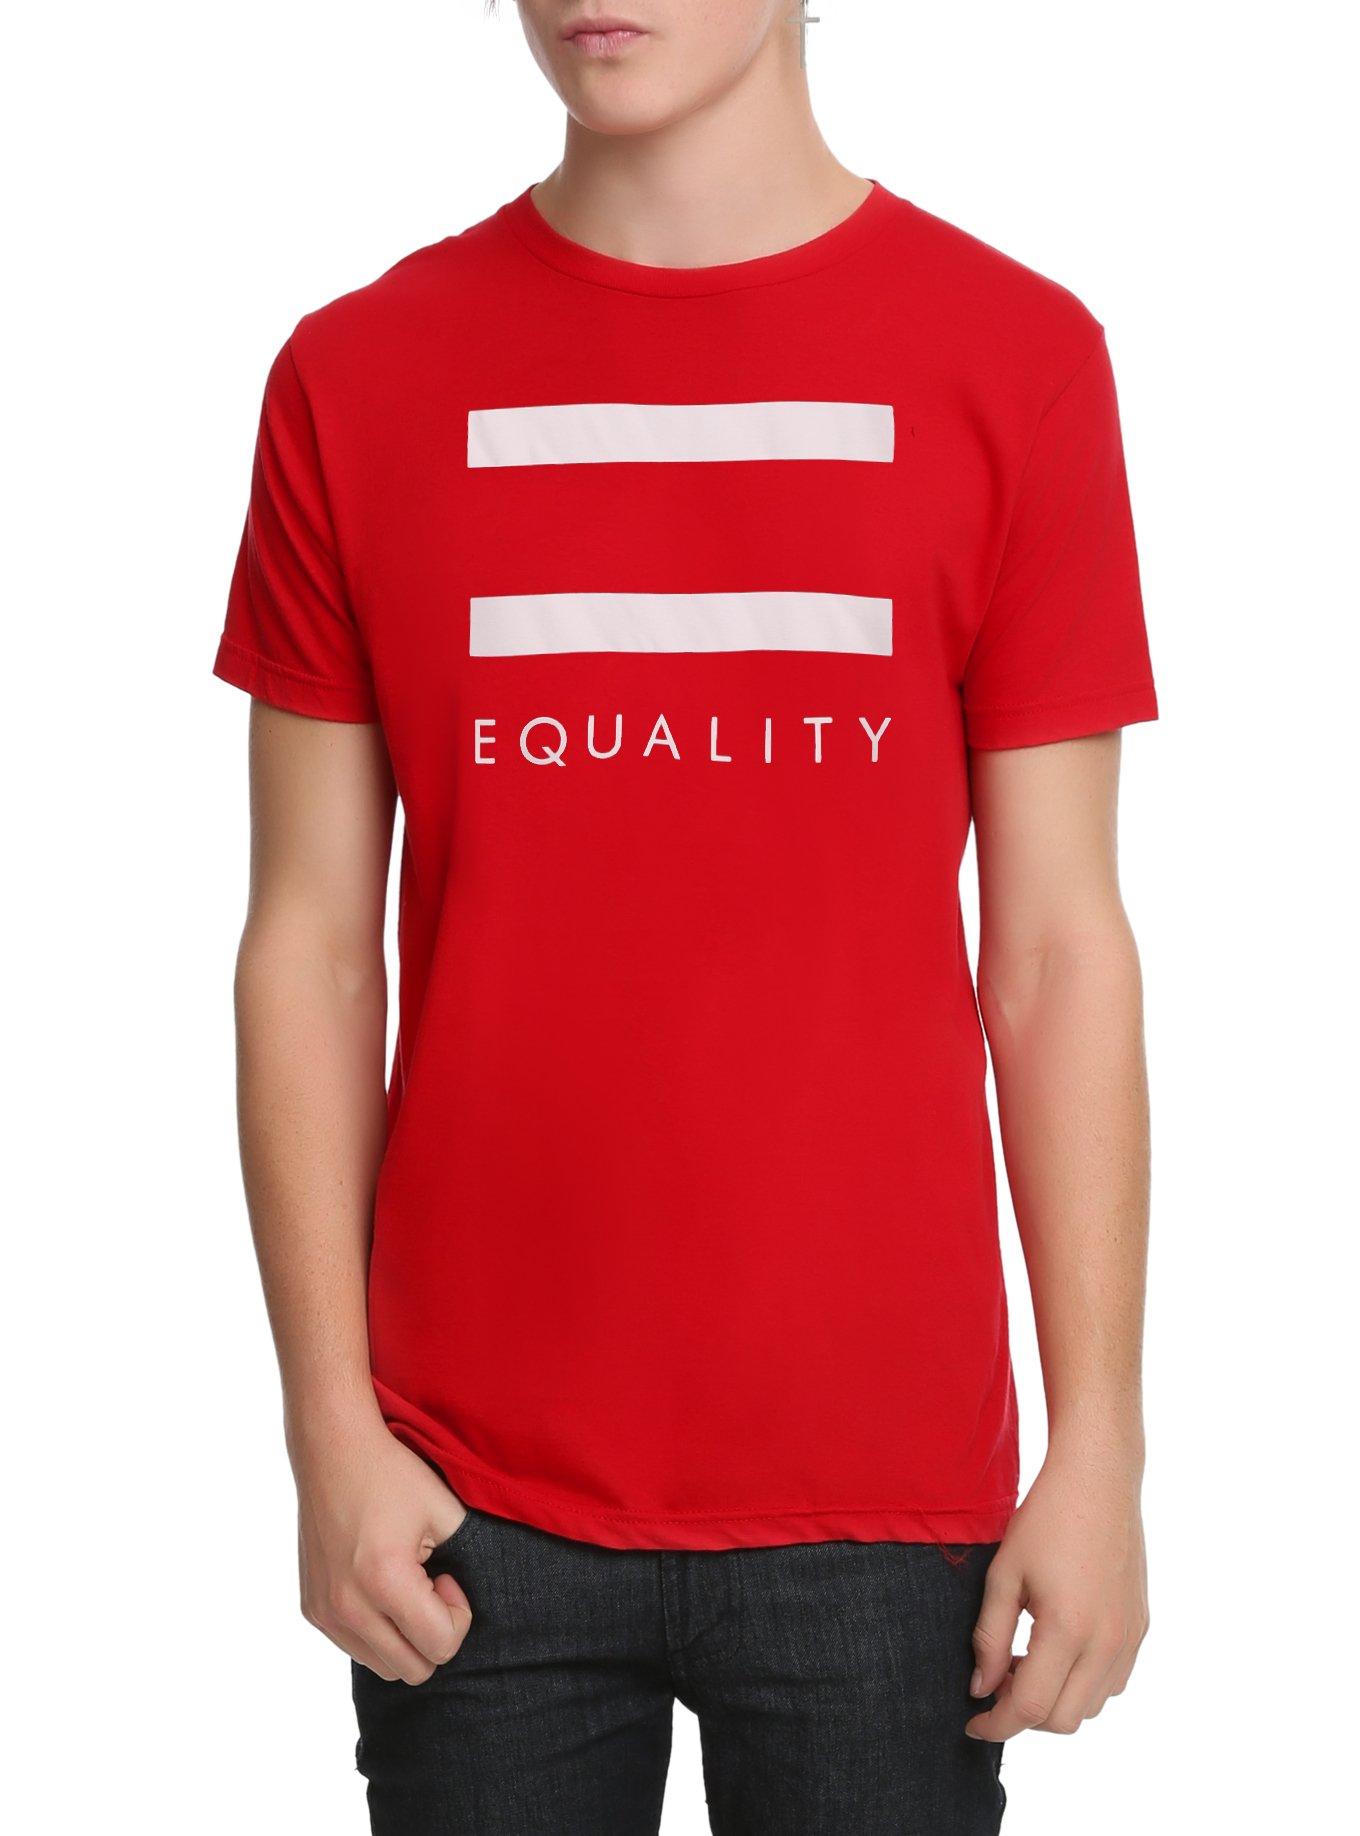 Equality T-Shirt, RED, hi-res